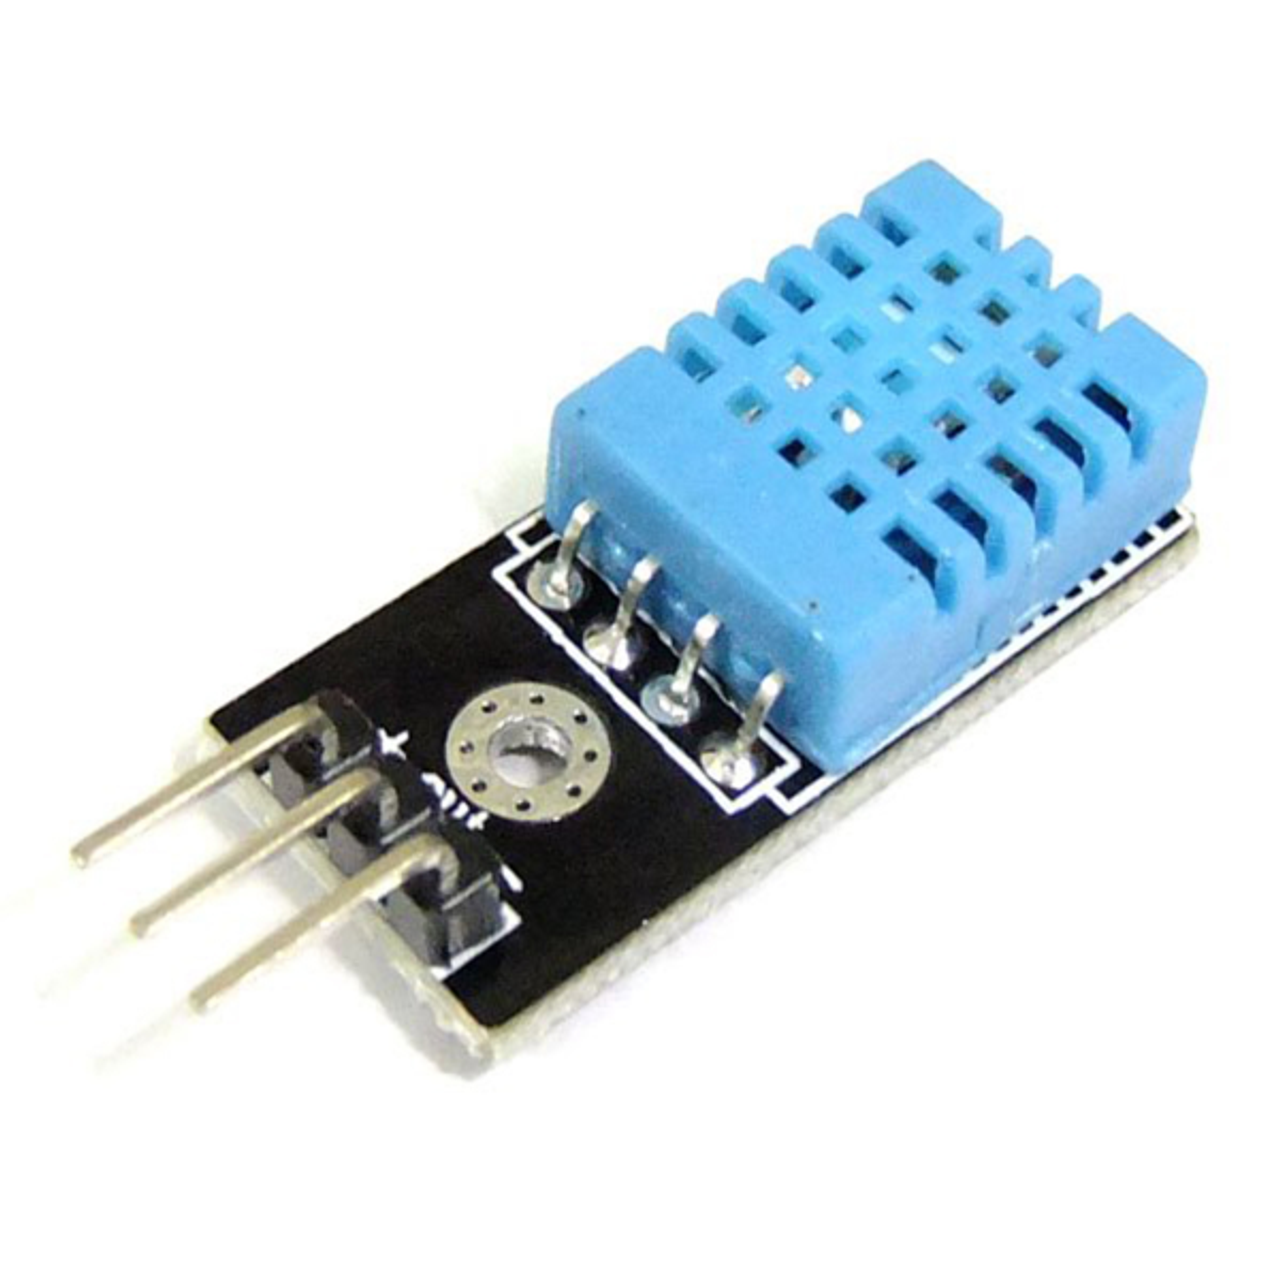 https://cdn11.bigcommerce.com/s-yo2n39m6g3/images/stencil/1280x1280/products/394/3881/chipskey-dht11-single-digital-output-temperature-humidity-sensor-module__30360.1583933098.png?c=2